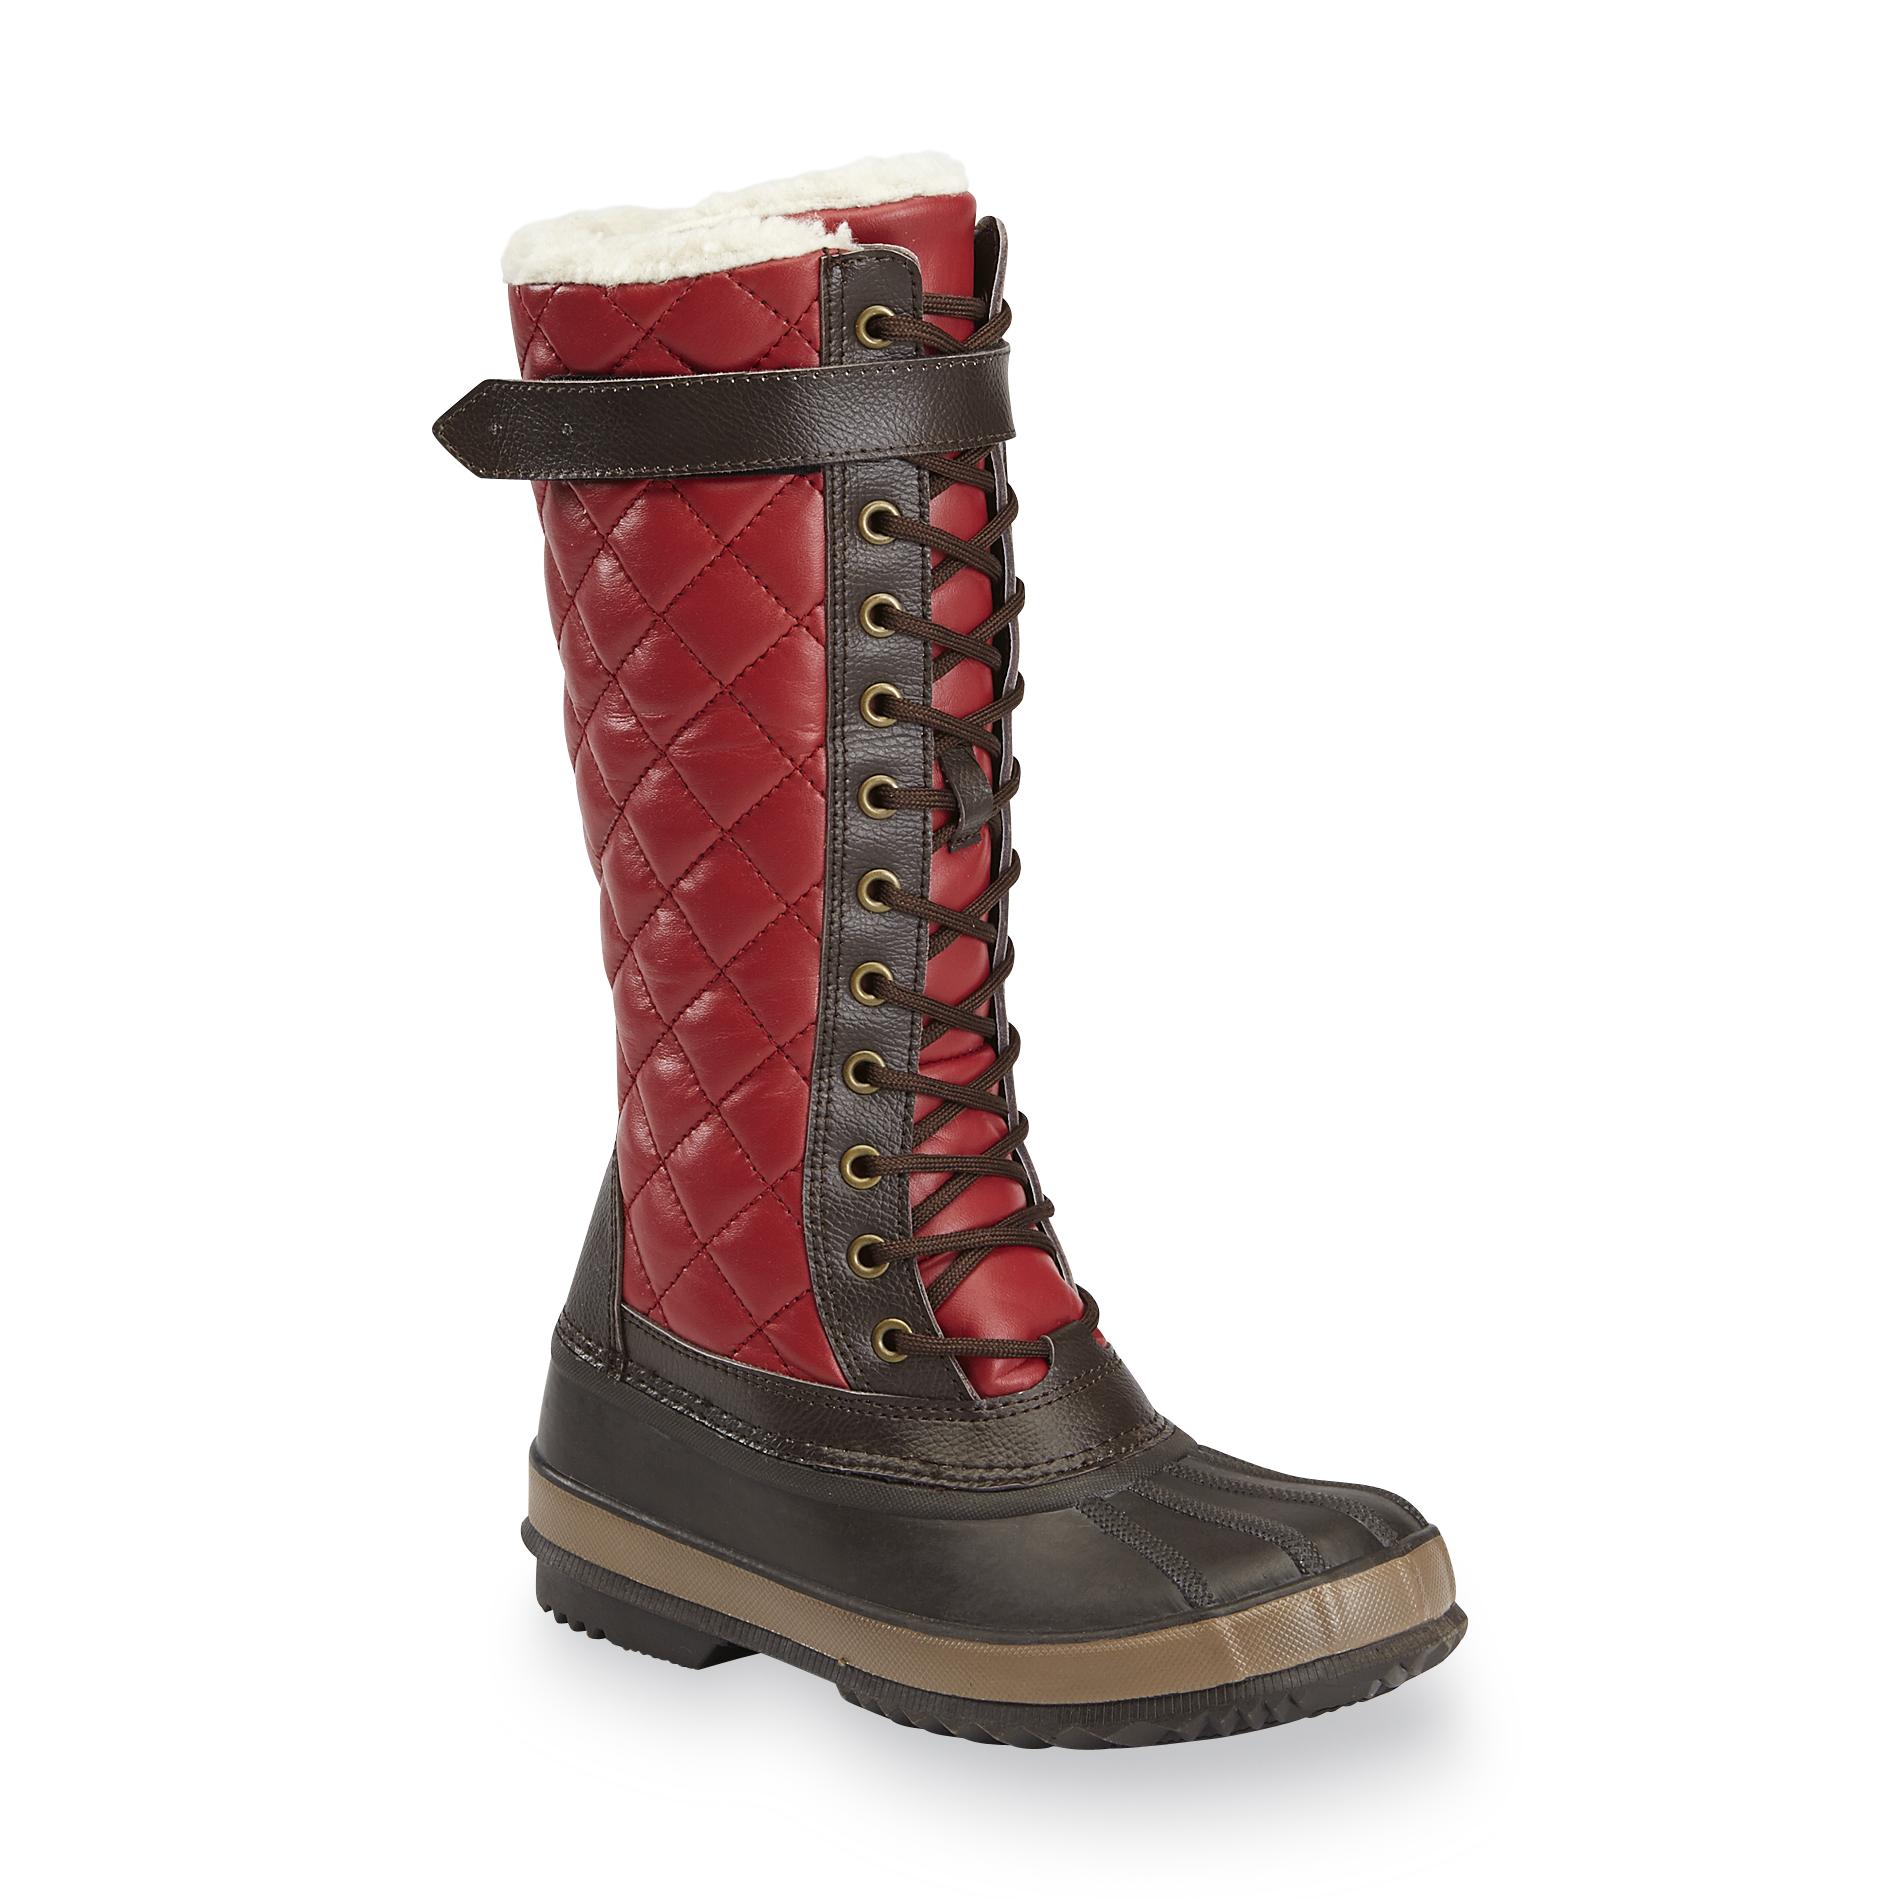 Athletech Women's 13" Quartz Red/Brown Quilted Winter Boot